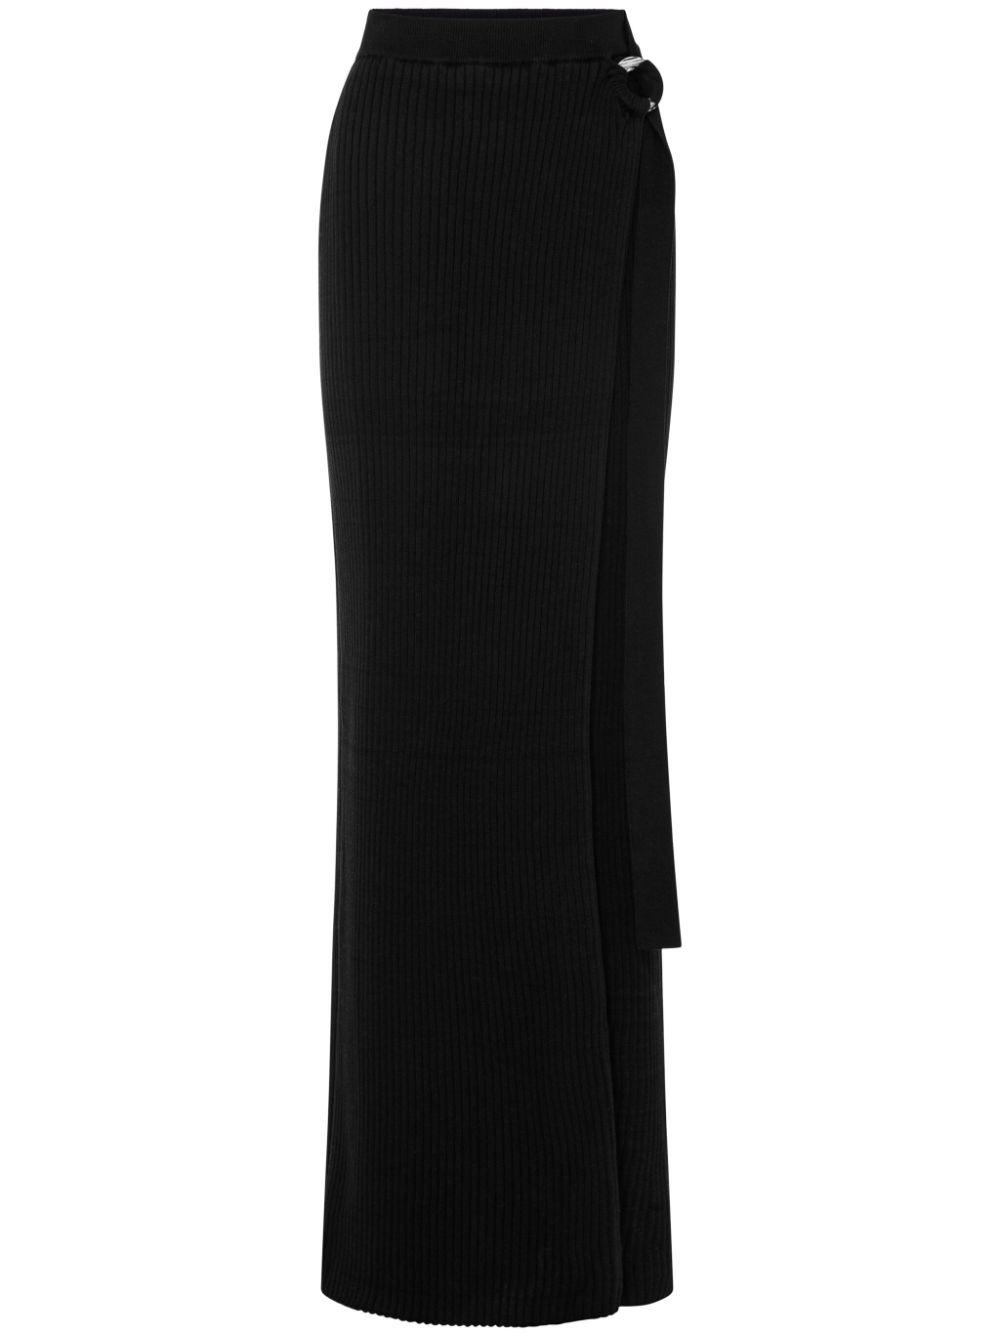 Anna Quan Mathilde Ribbed-knit Maxi Wrap Skirt in Black | Lyst